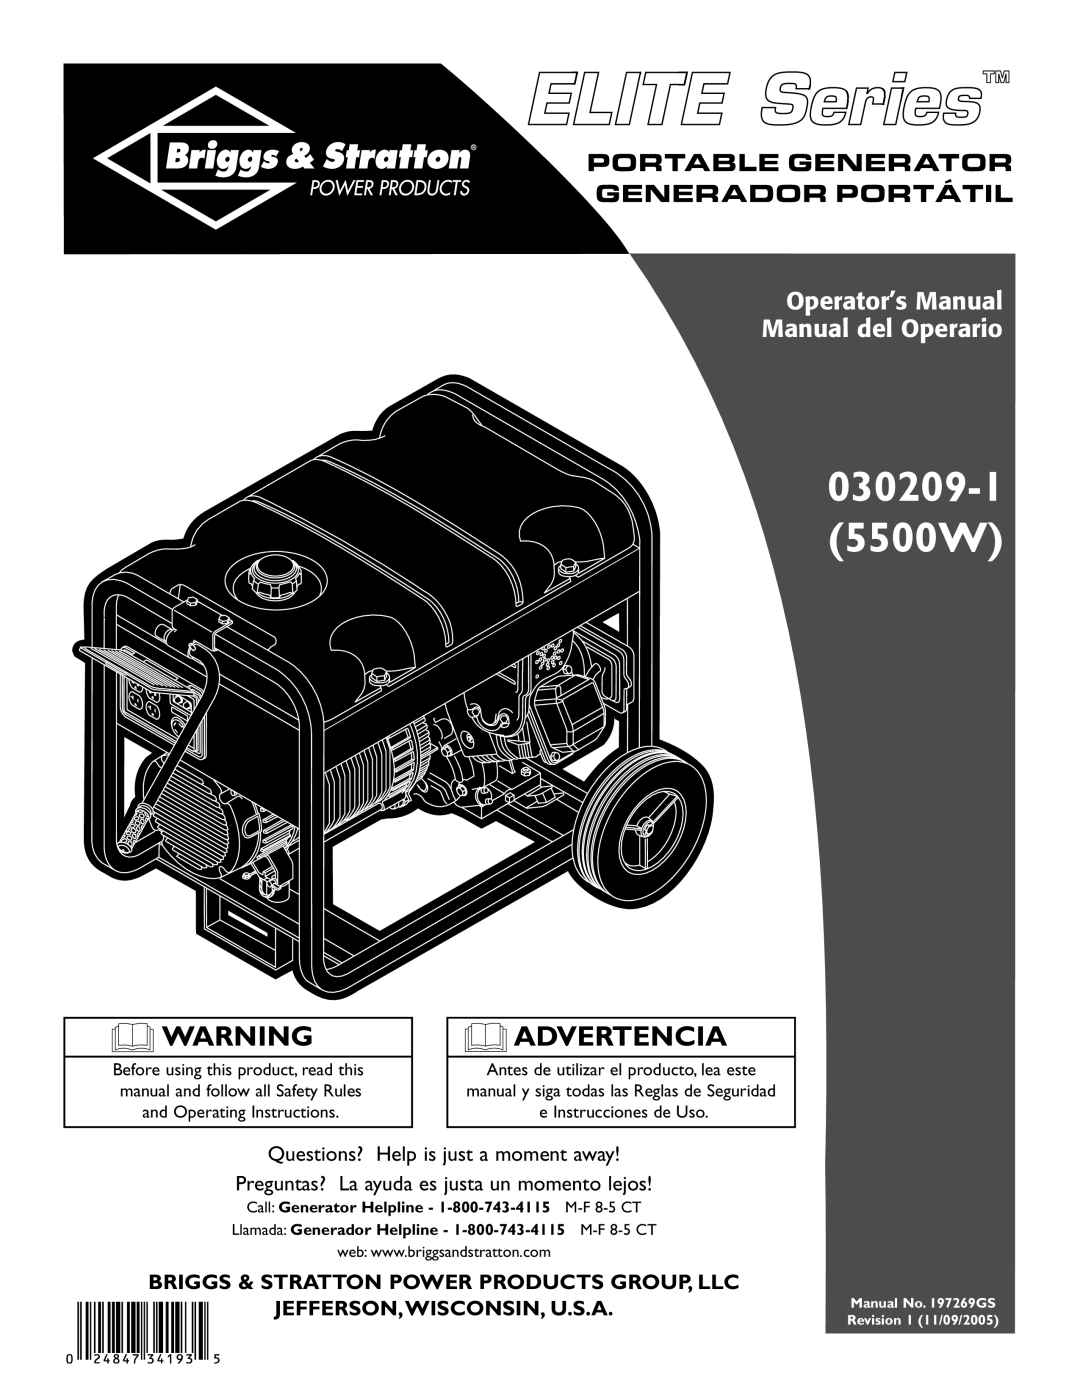 Briggs & Stratton 030209-1 operating instructions Questions? Help is just a moment away, Jefferson,Wisconsin, U.S.A 